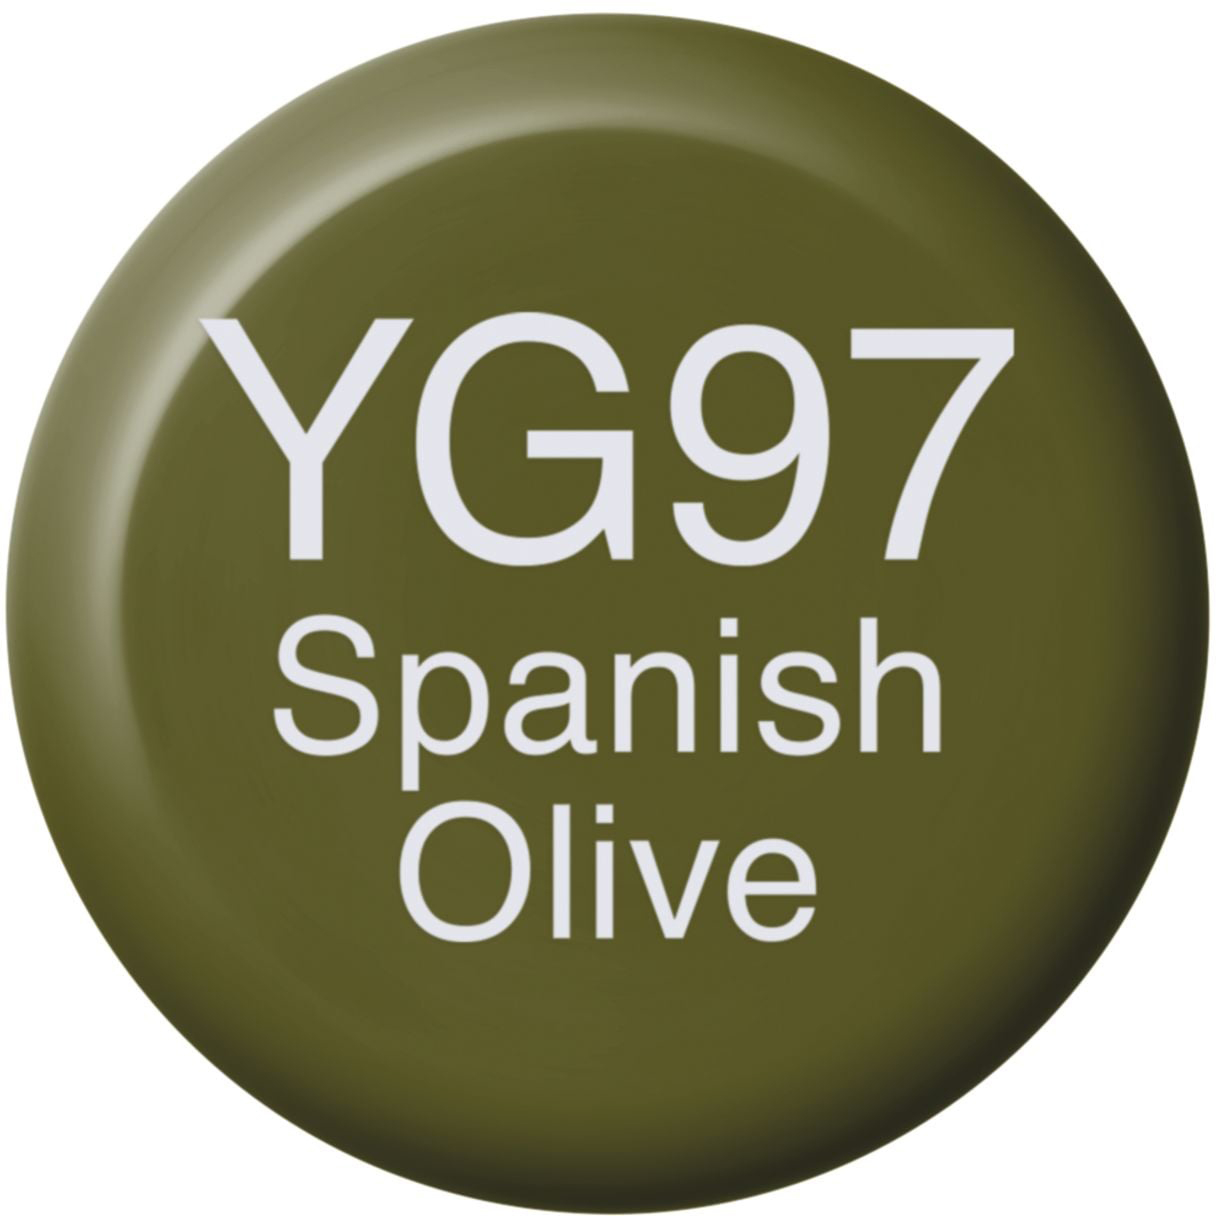 COPIC Ink Refill 2107659 YG97 - Spanish Olive